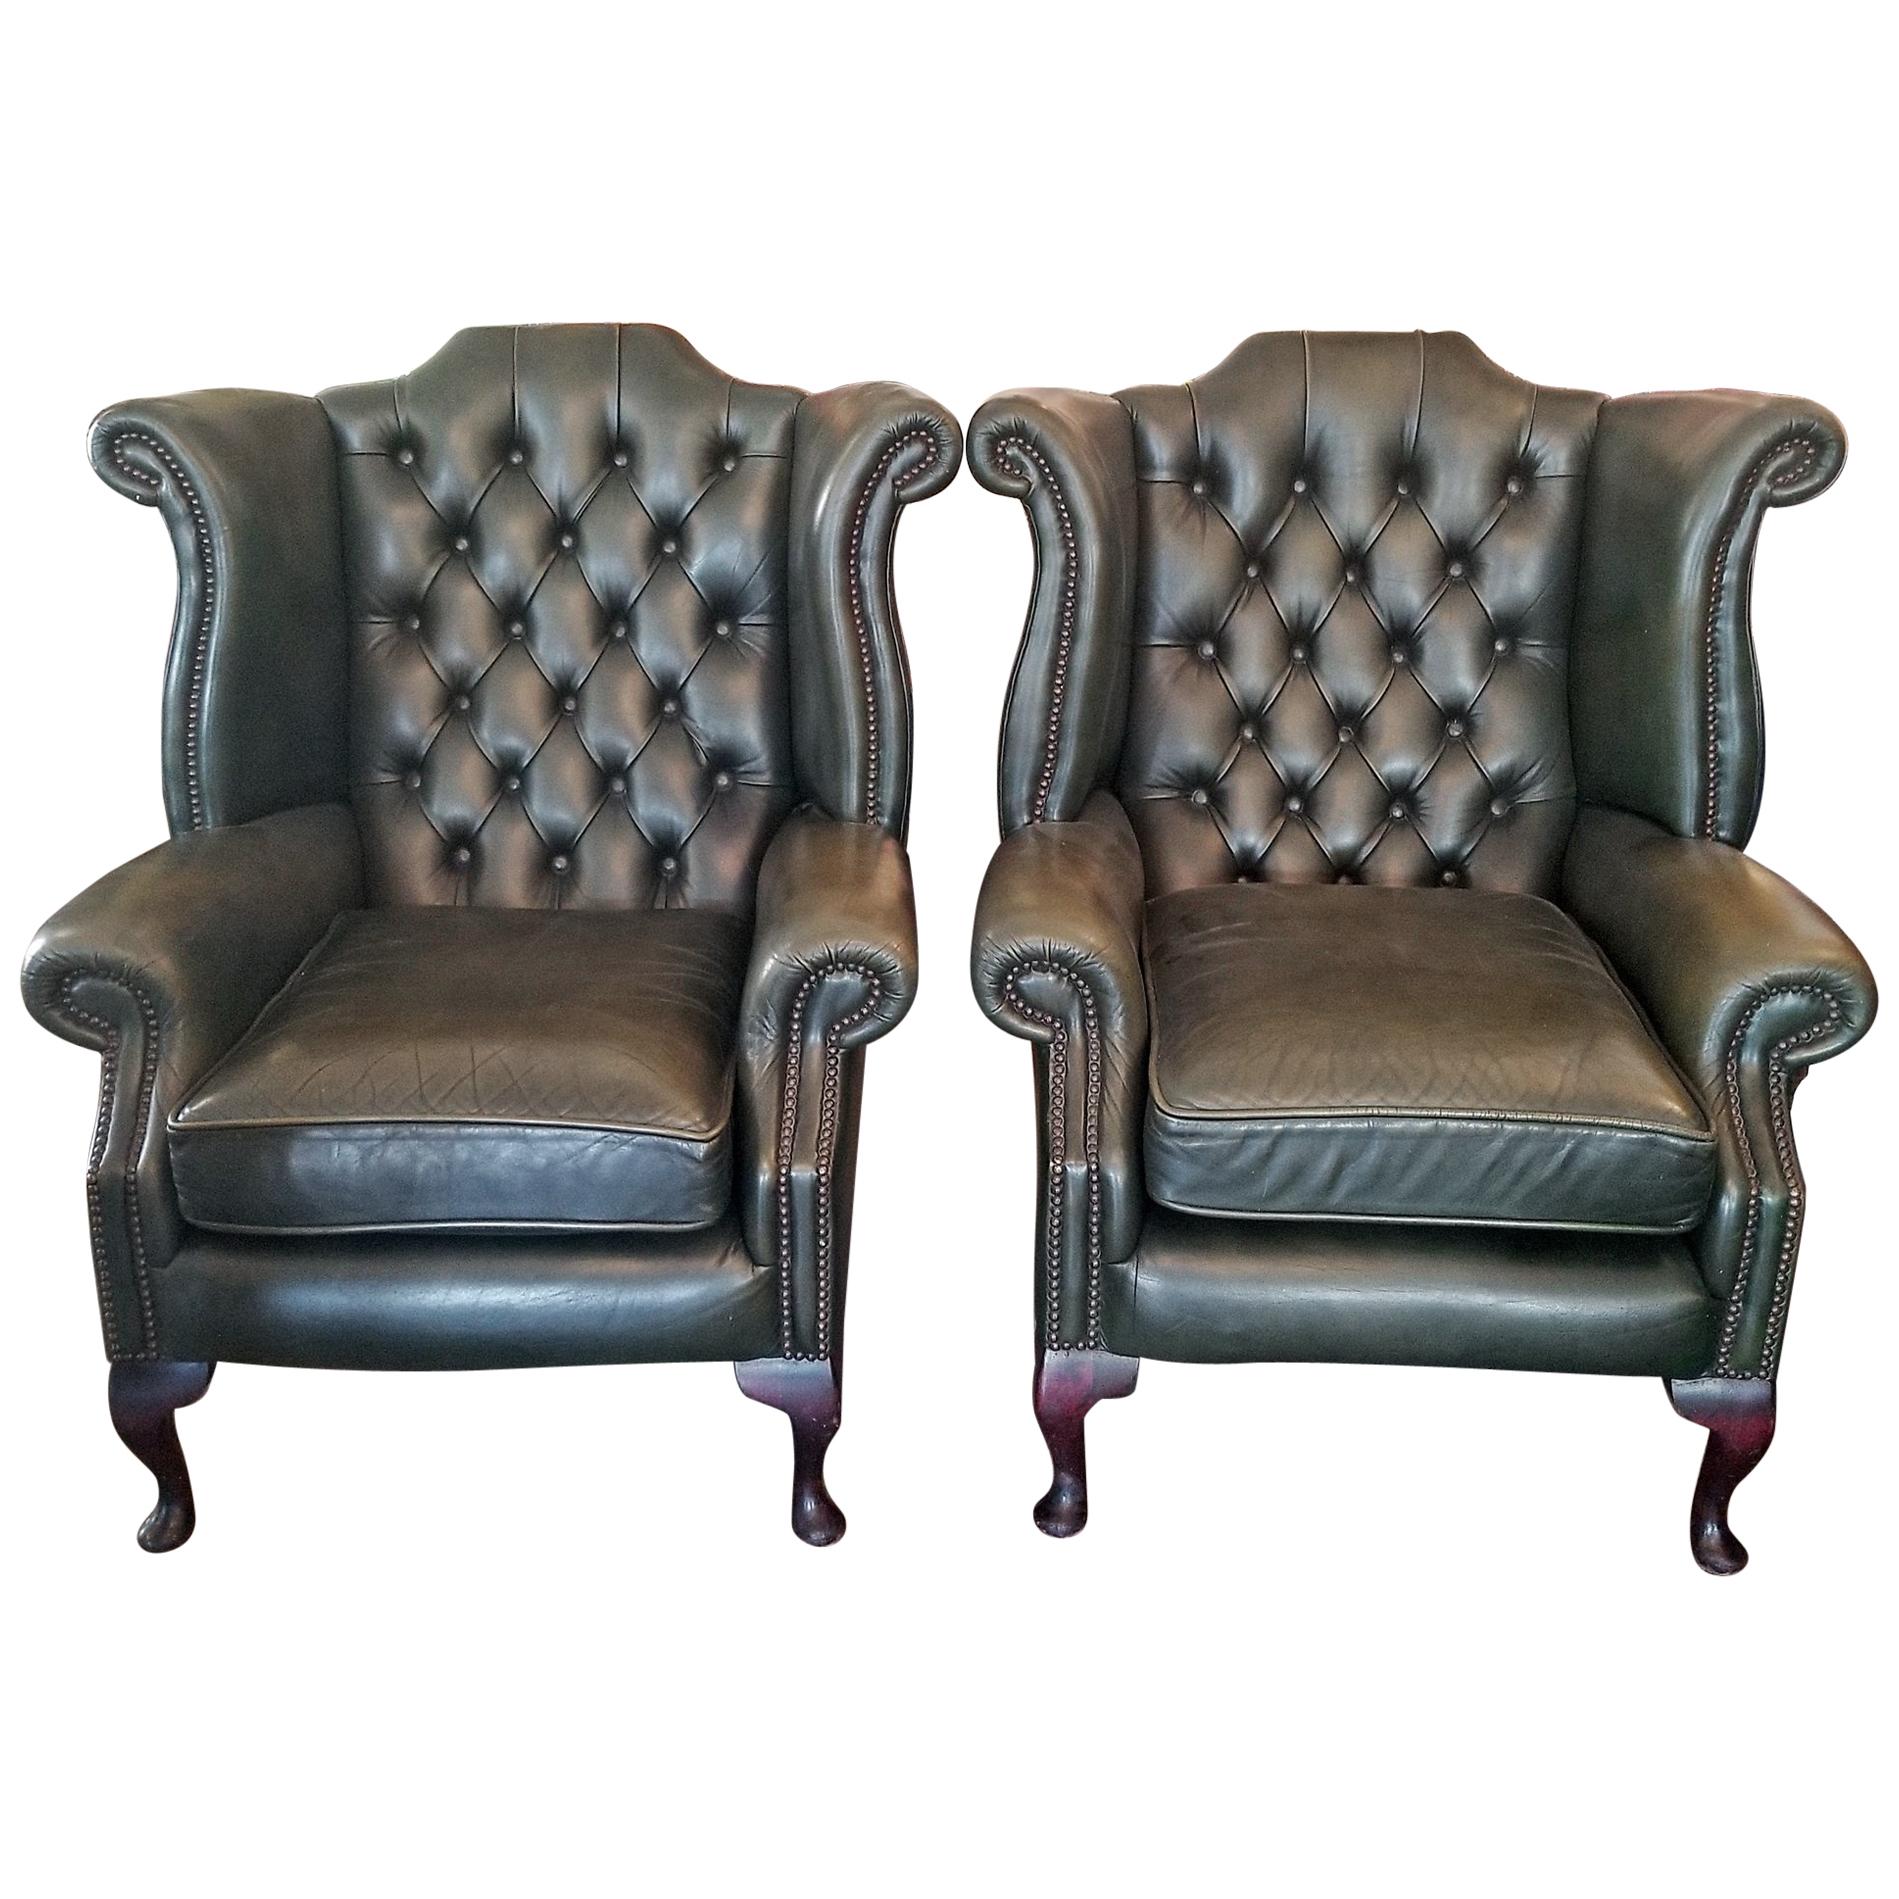 Pair of Leather Chesterfield Queen Ann Style Wing Back Armchairs